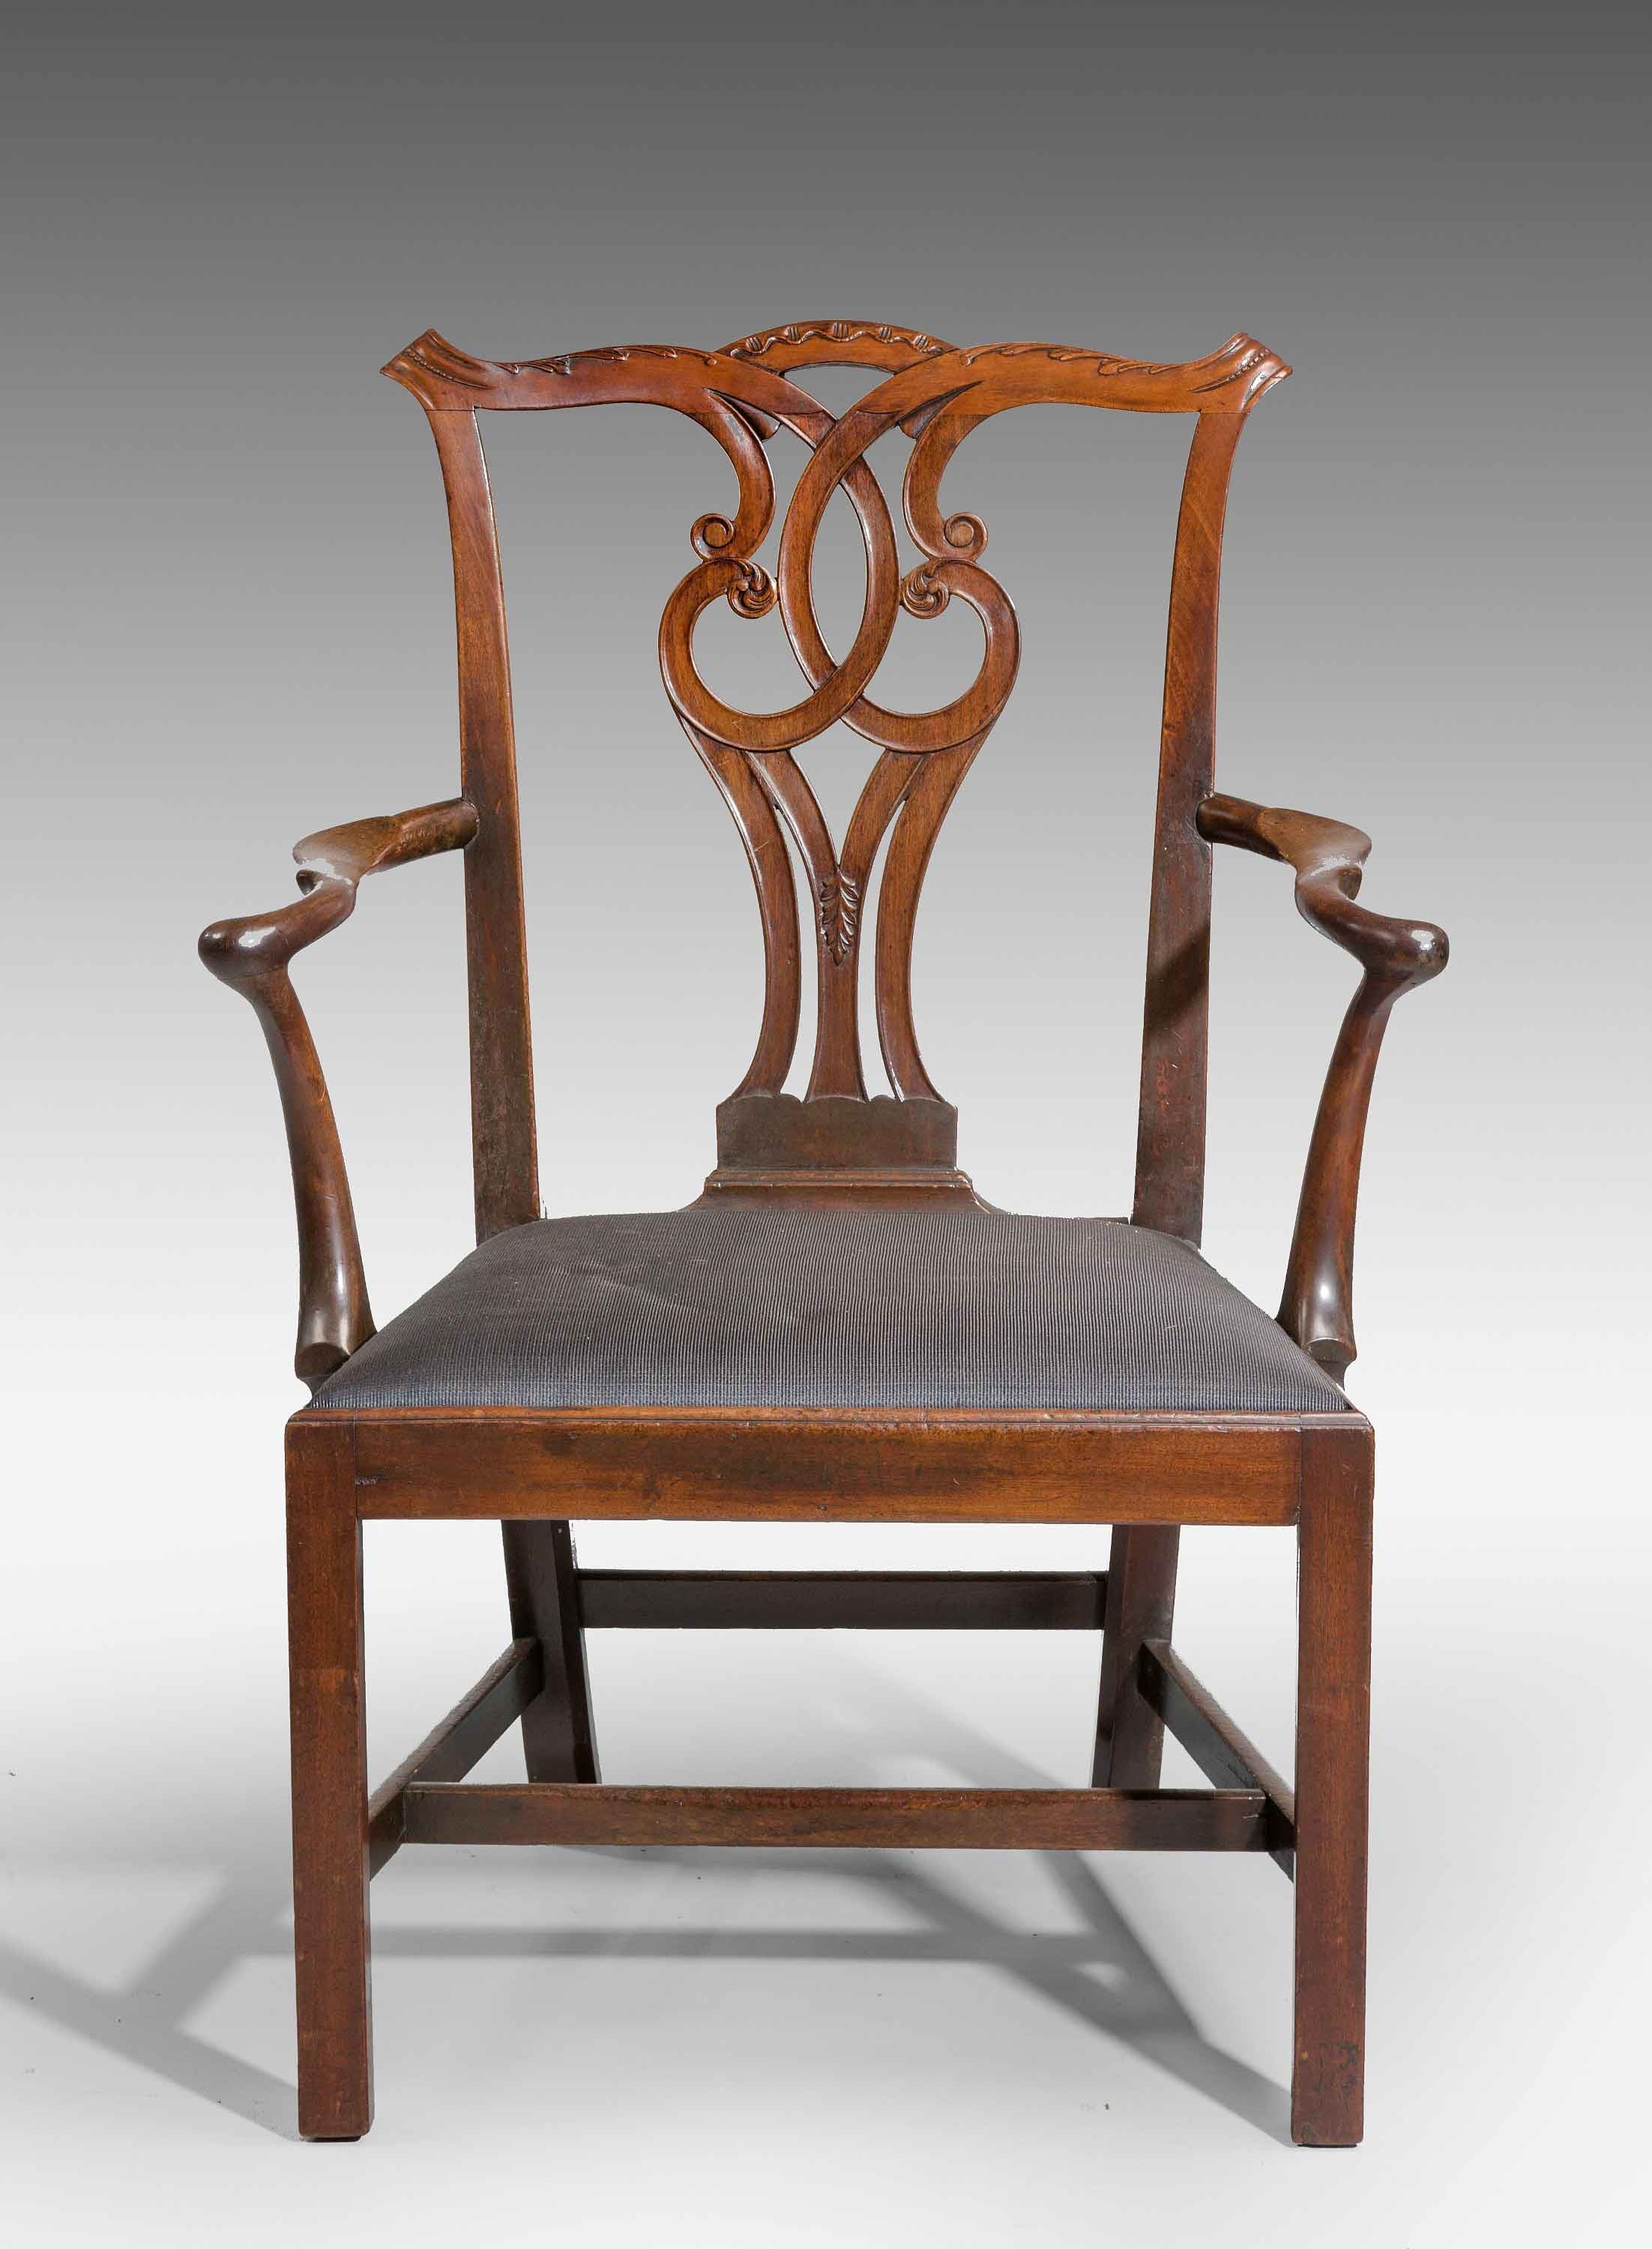 Chippendale Period Mahogany Elbow Chair